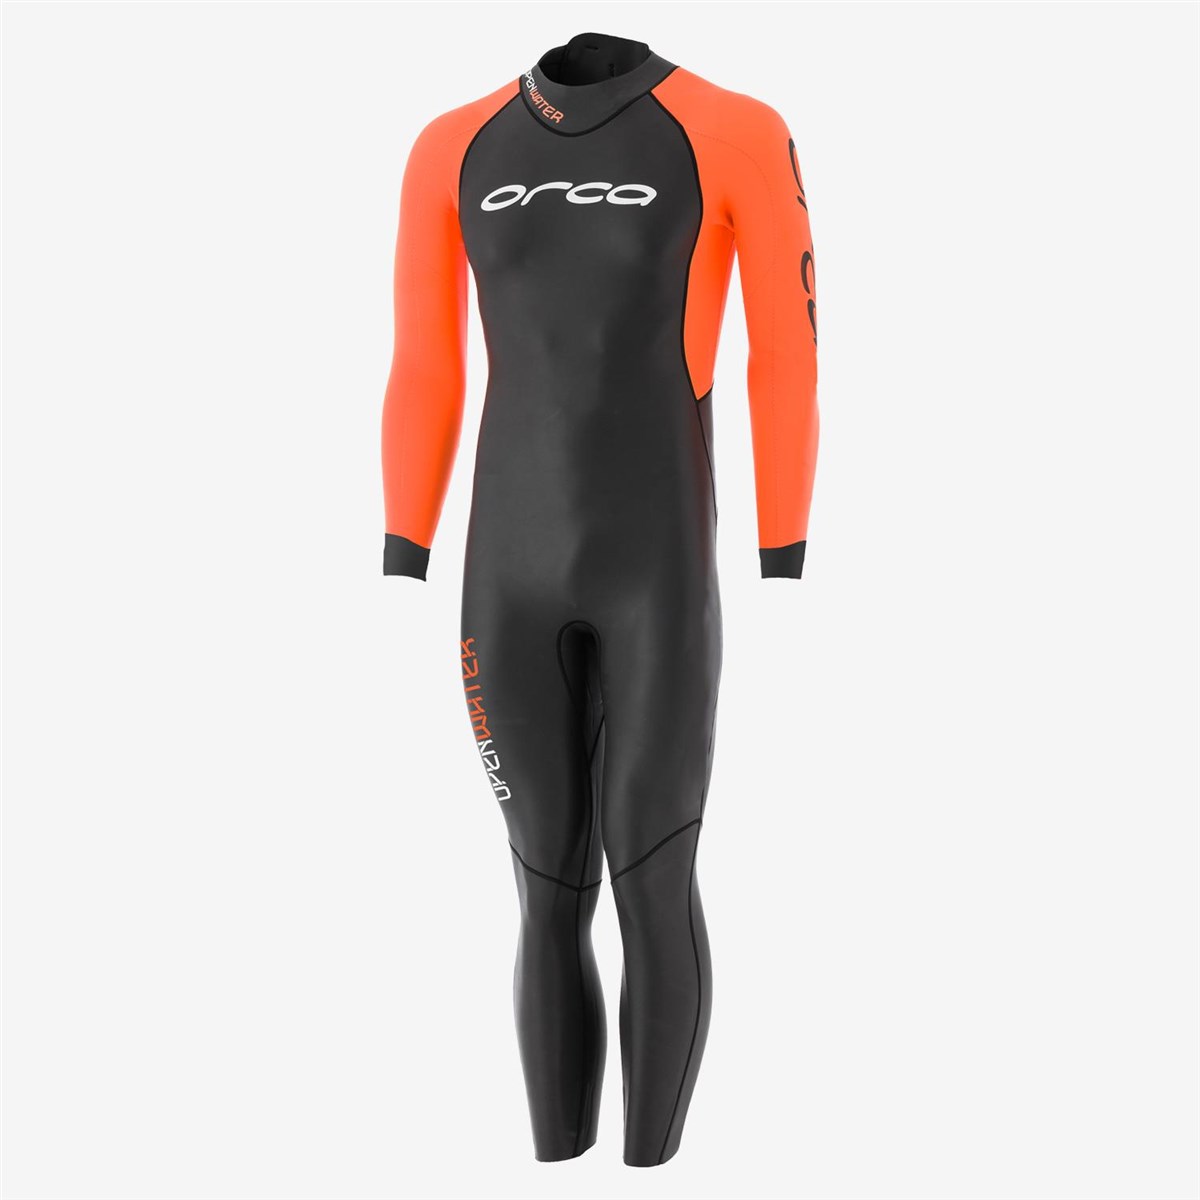 Orca Openwater Full Sleeve Wetsuit